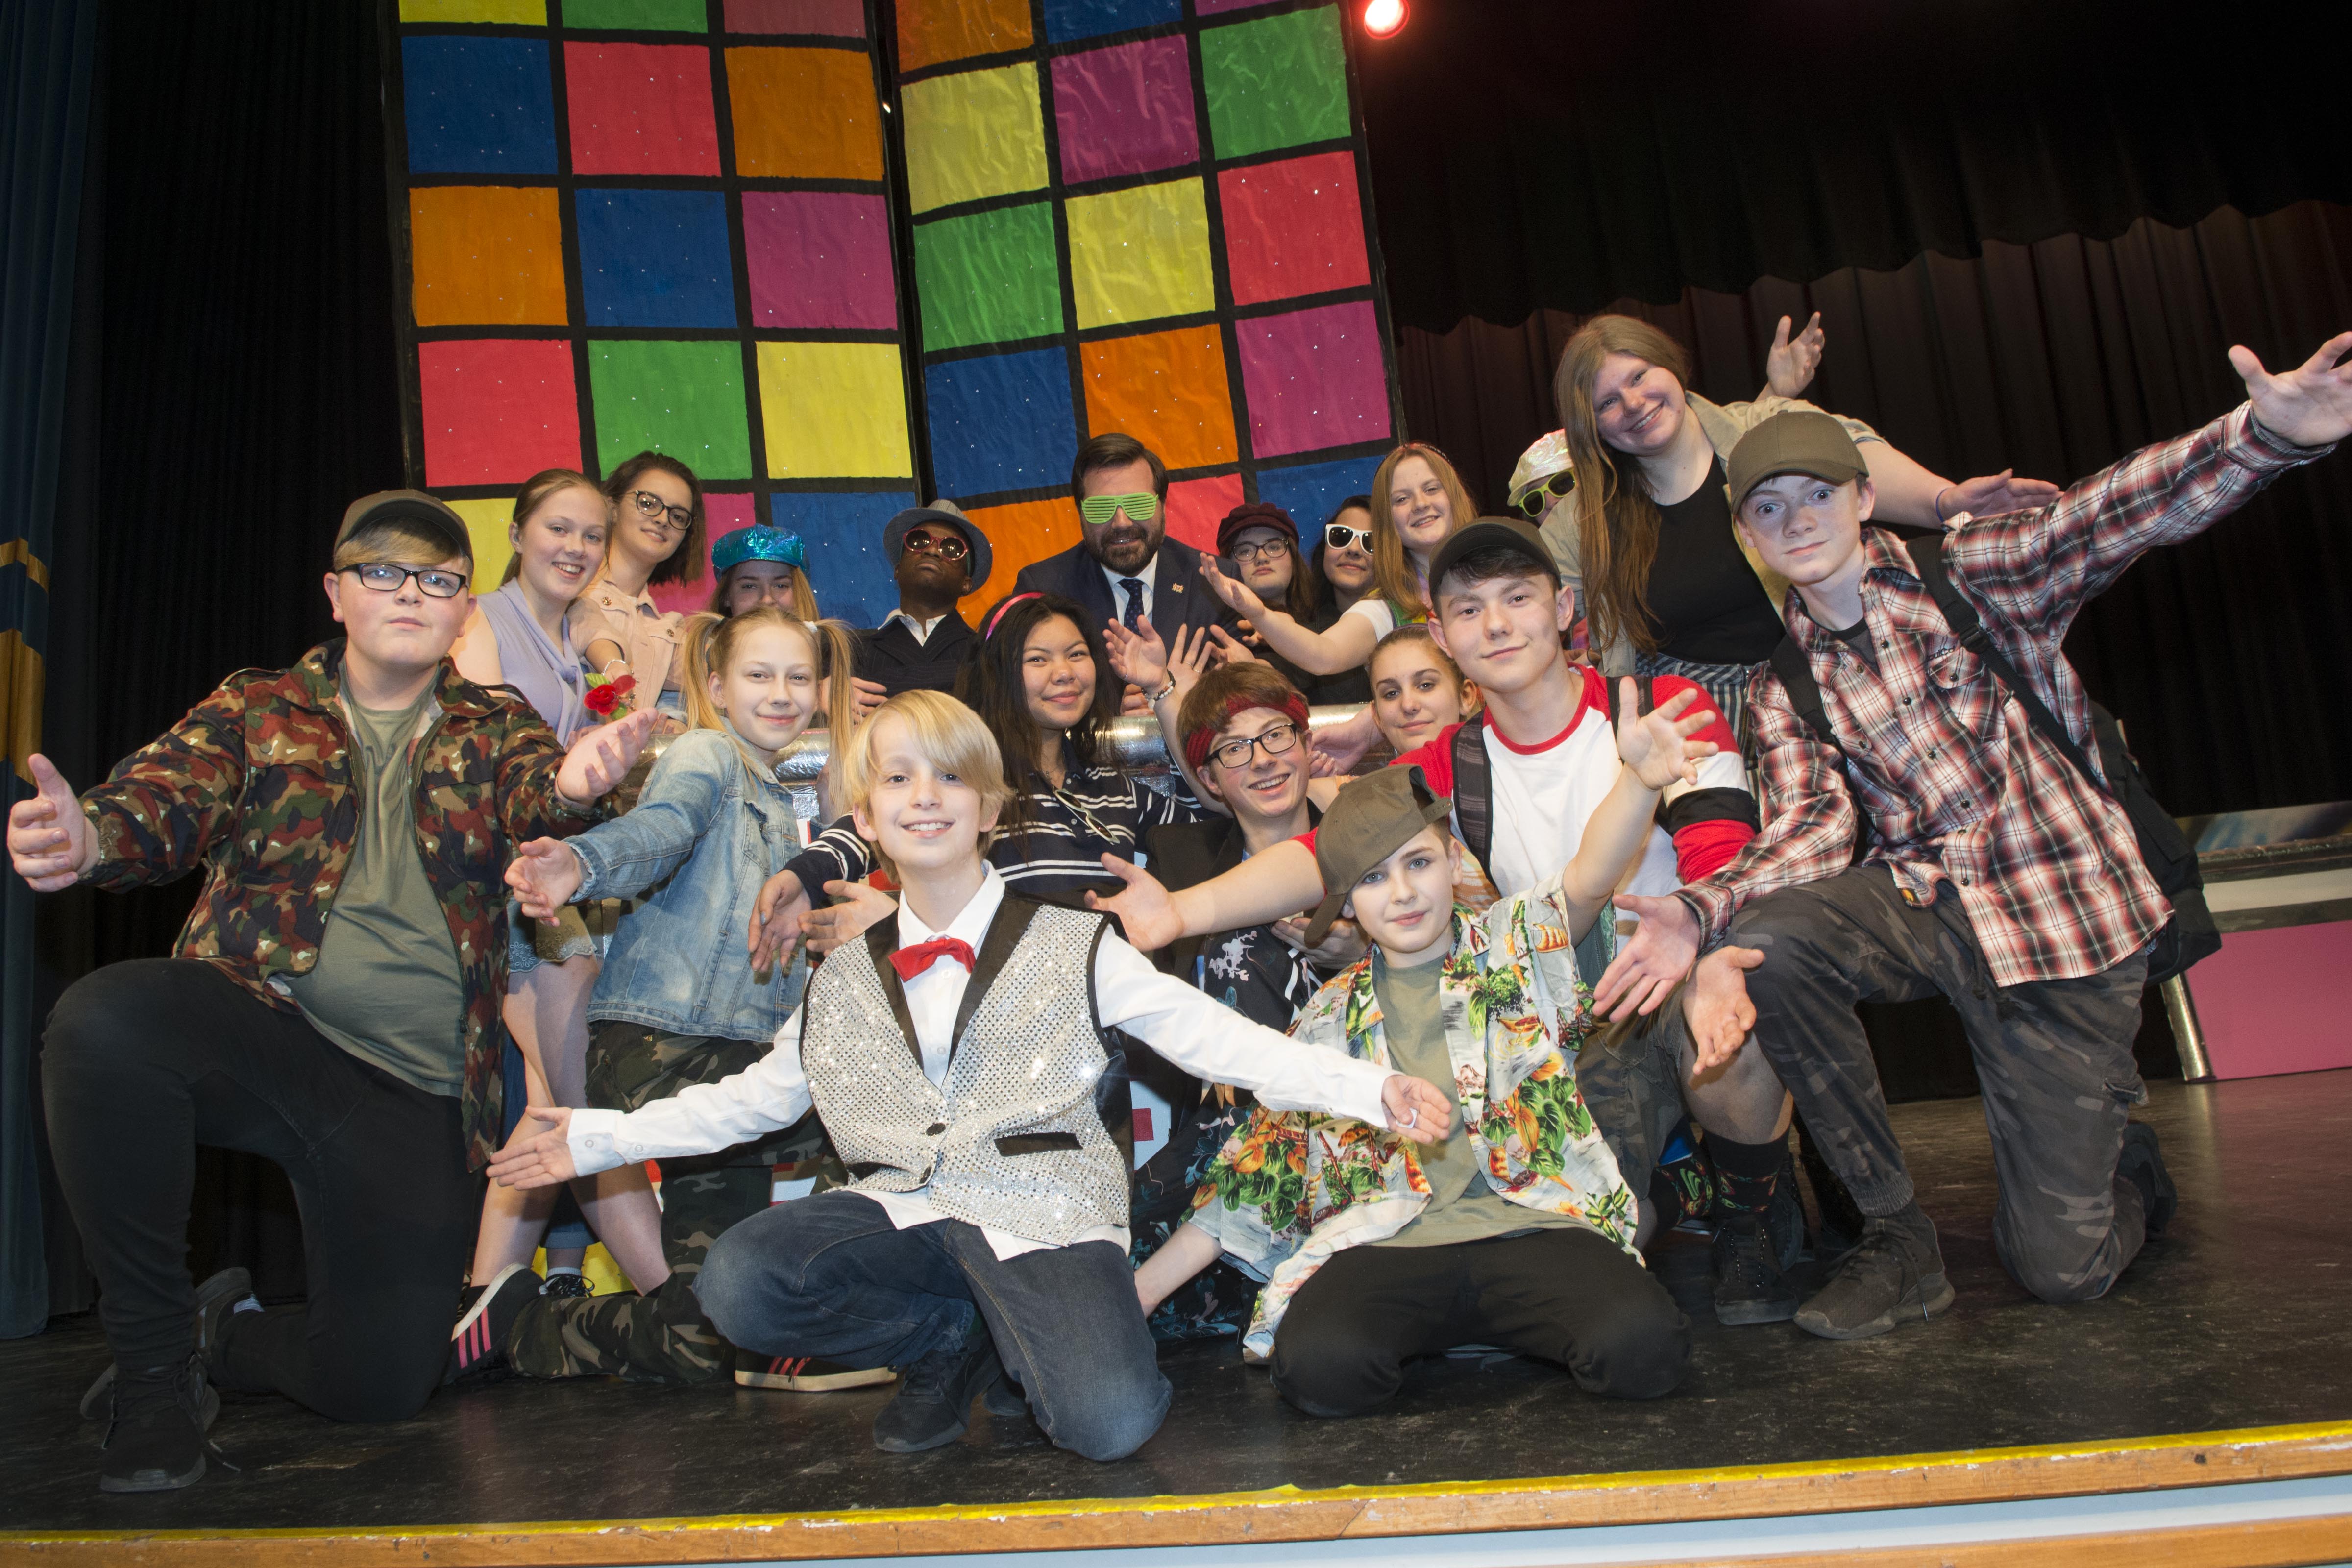 21/02/19

St Machar Academy pupils and staff are all ready to Turn Back Time with 90s chart topping music from the likes of Cher, Backstreet Boys and the Spice Girls by performing in nostalgic musical, it was announced today (Friday 22 February).The talented ensemble will be performing in Popstars the 90’s Musical in the school hall on Wednesday 27, Thursday 28 February and Friday 1 March.The musical is about a love-triangle with a pop talent show at the centre of things as a girl band takes on a boy band for the Grand Prize. Fun and hilarity, and more than a few vintage pop classics are guaranteed along the way!